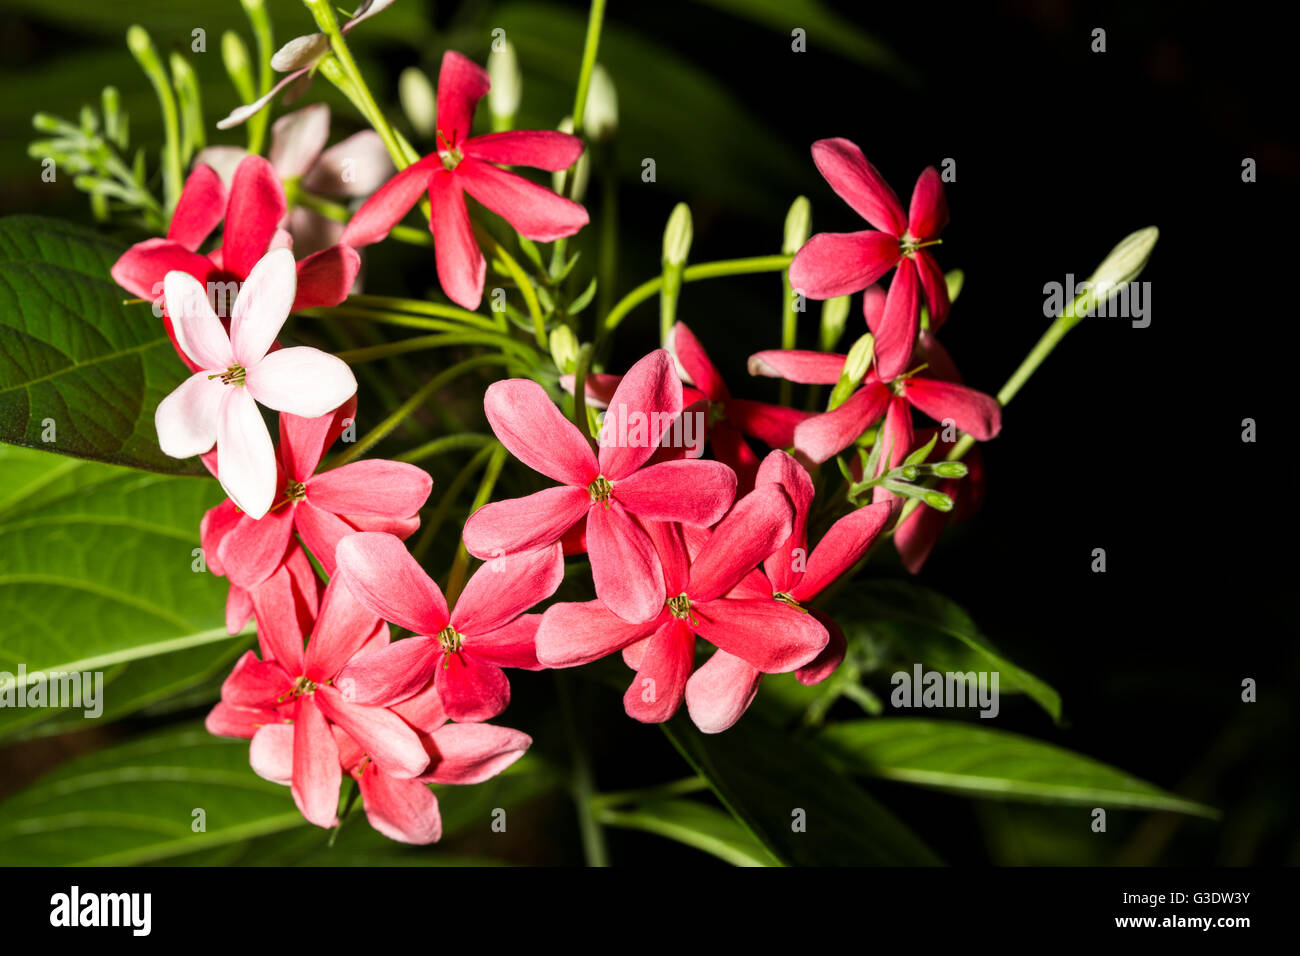 Bright pink and red flowers in flash with green leaves Stock Photo